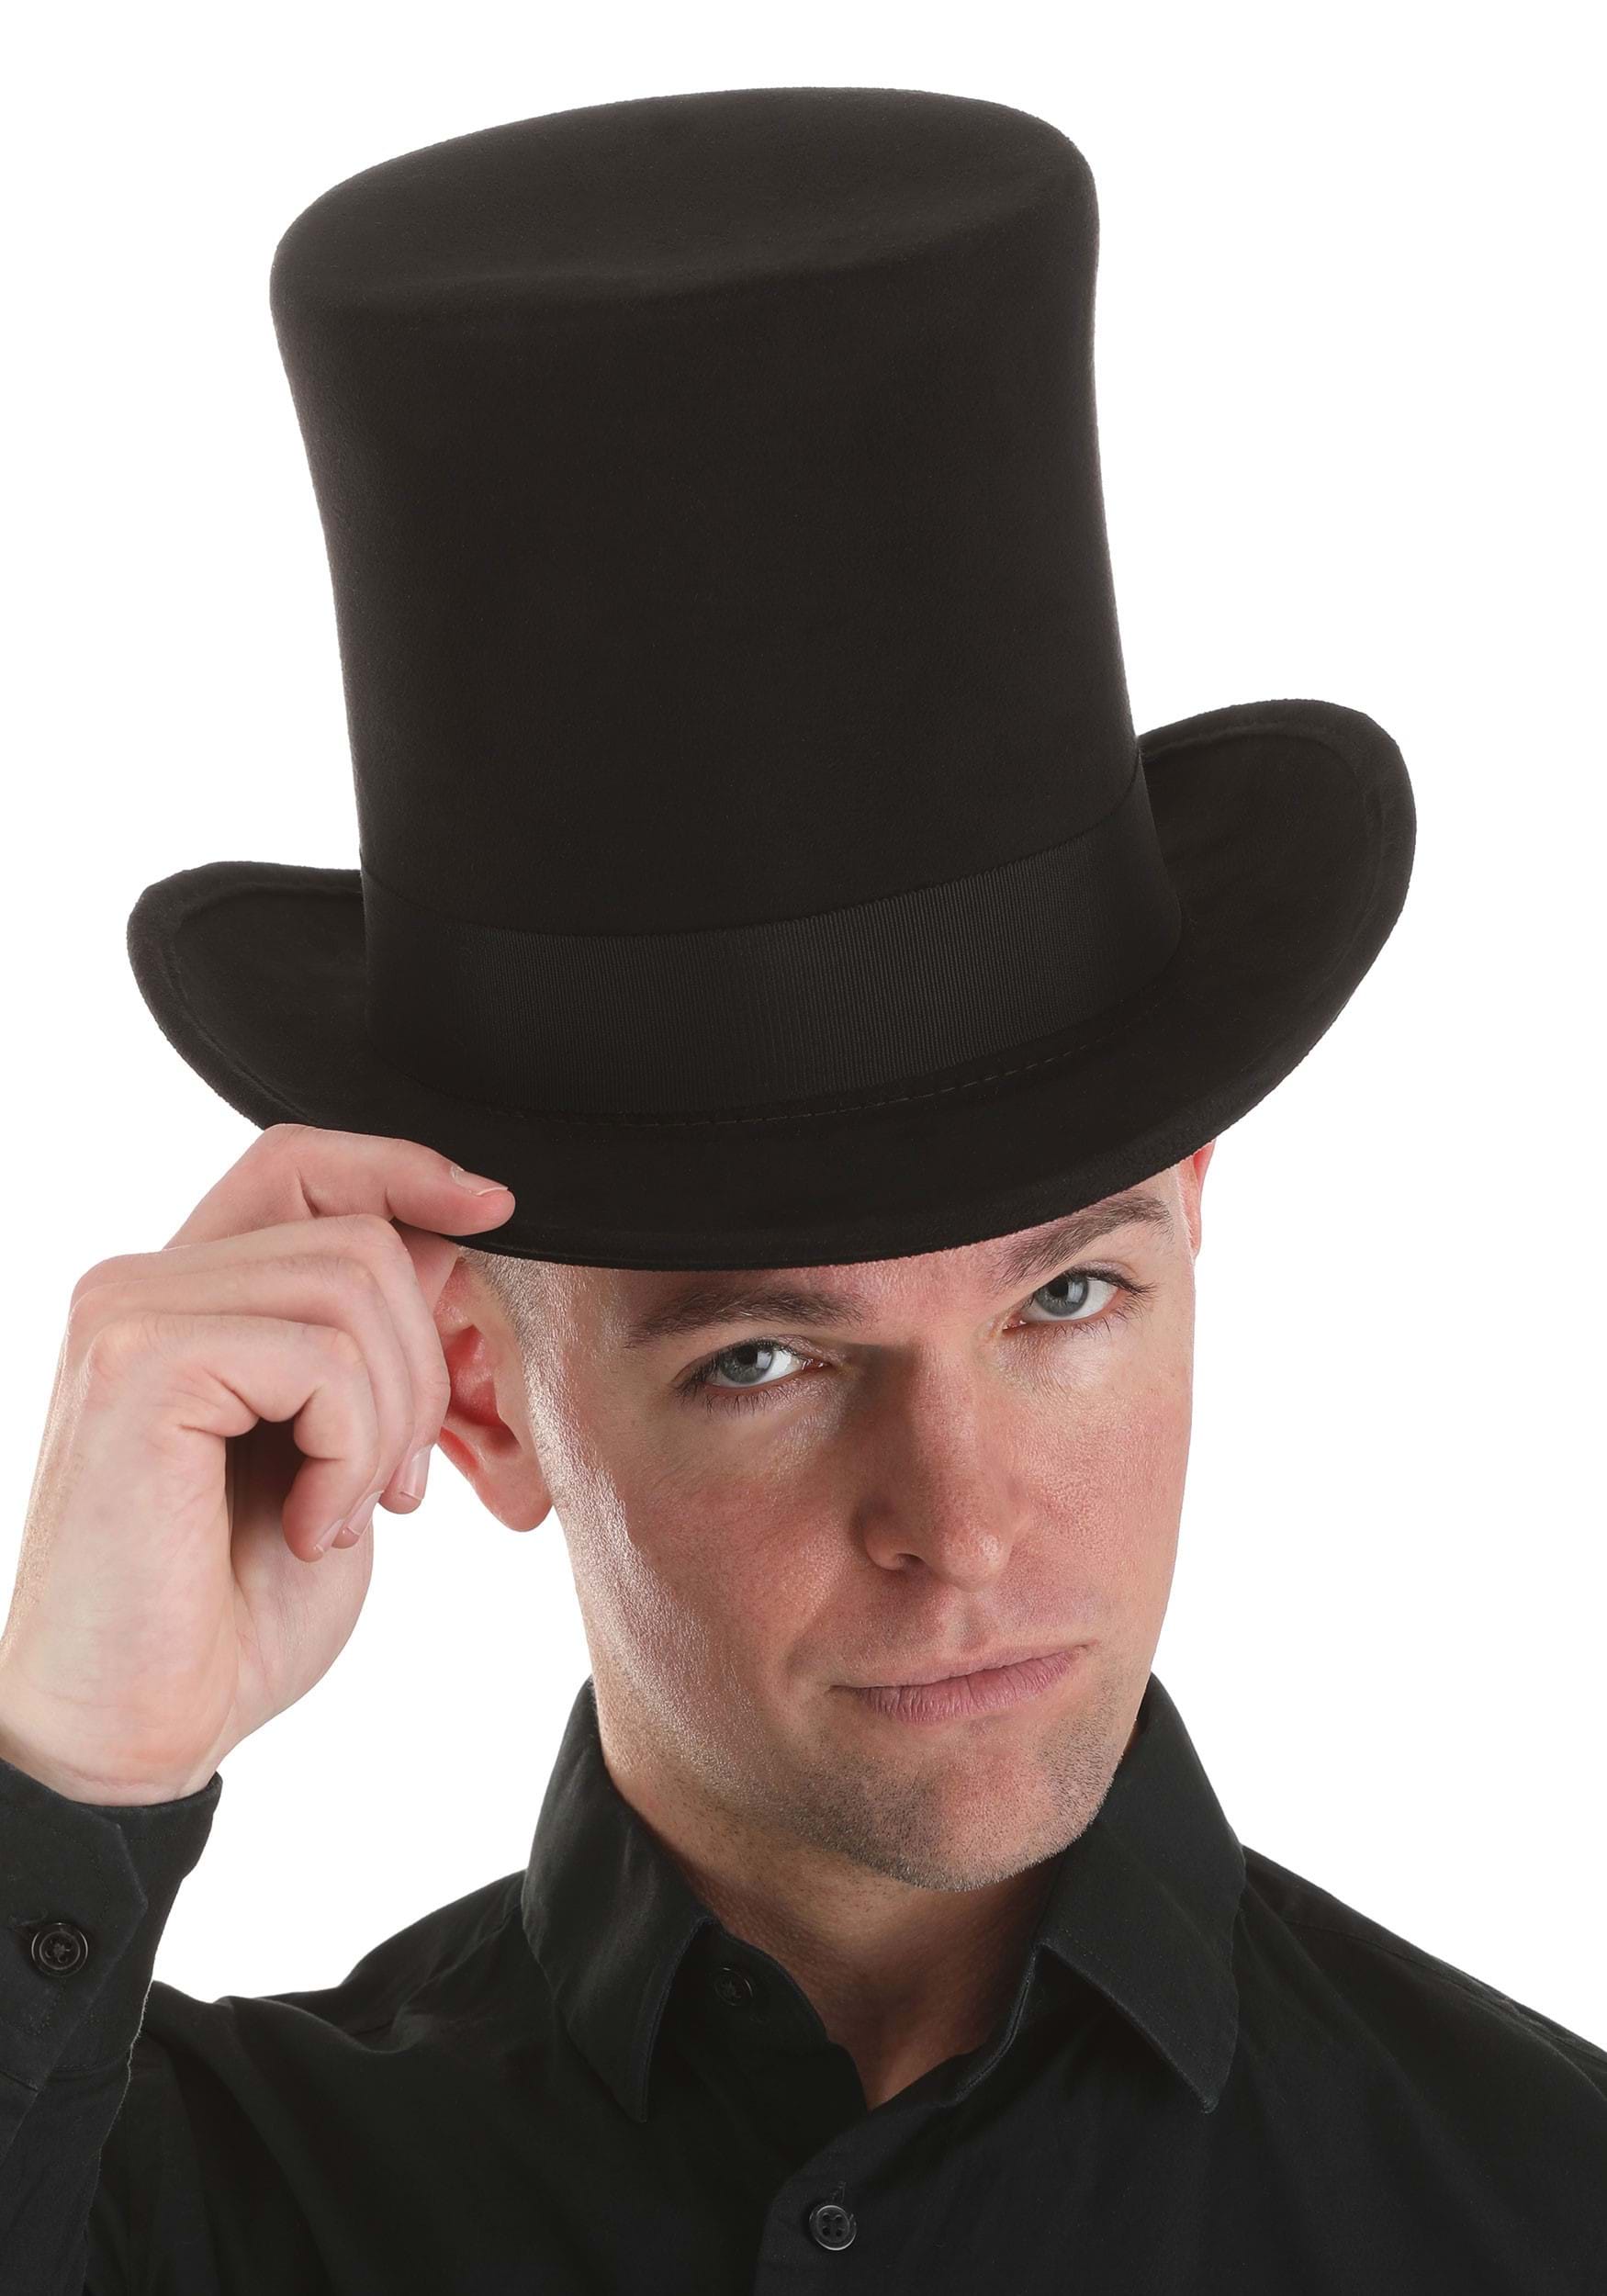 https://images.halloweencostumes.com/products/80789/1-1/adult-black-top-hat.jpg